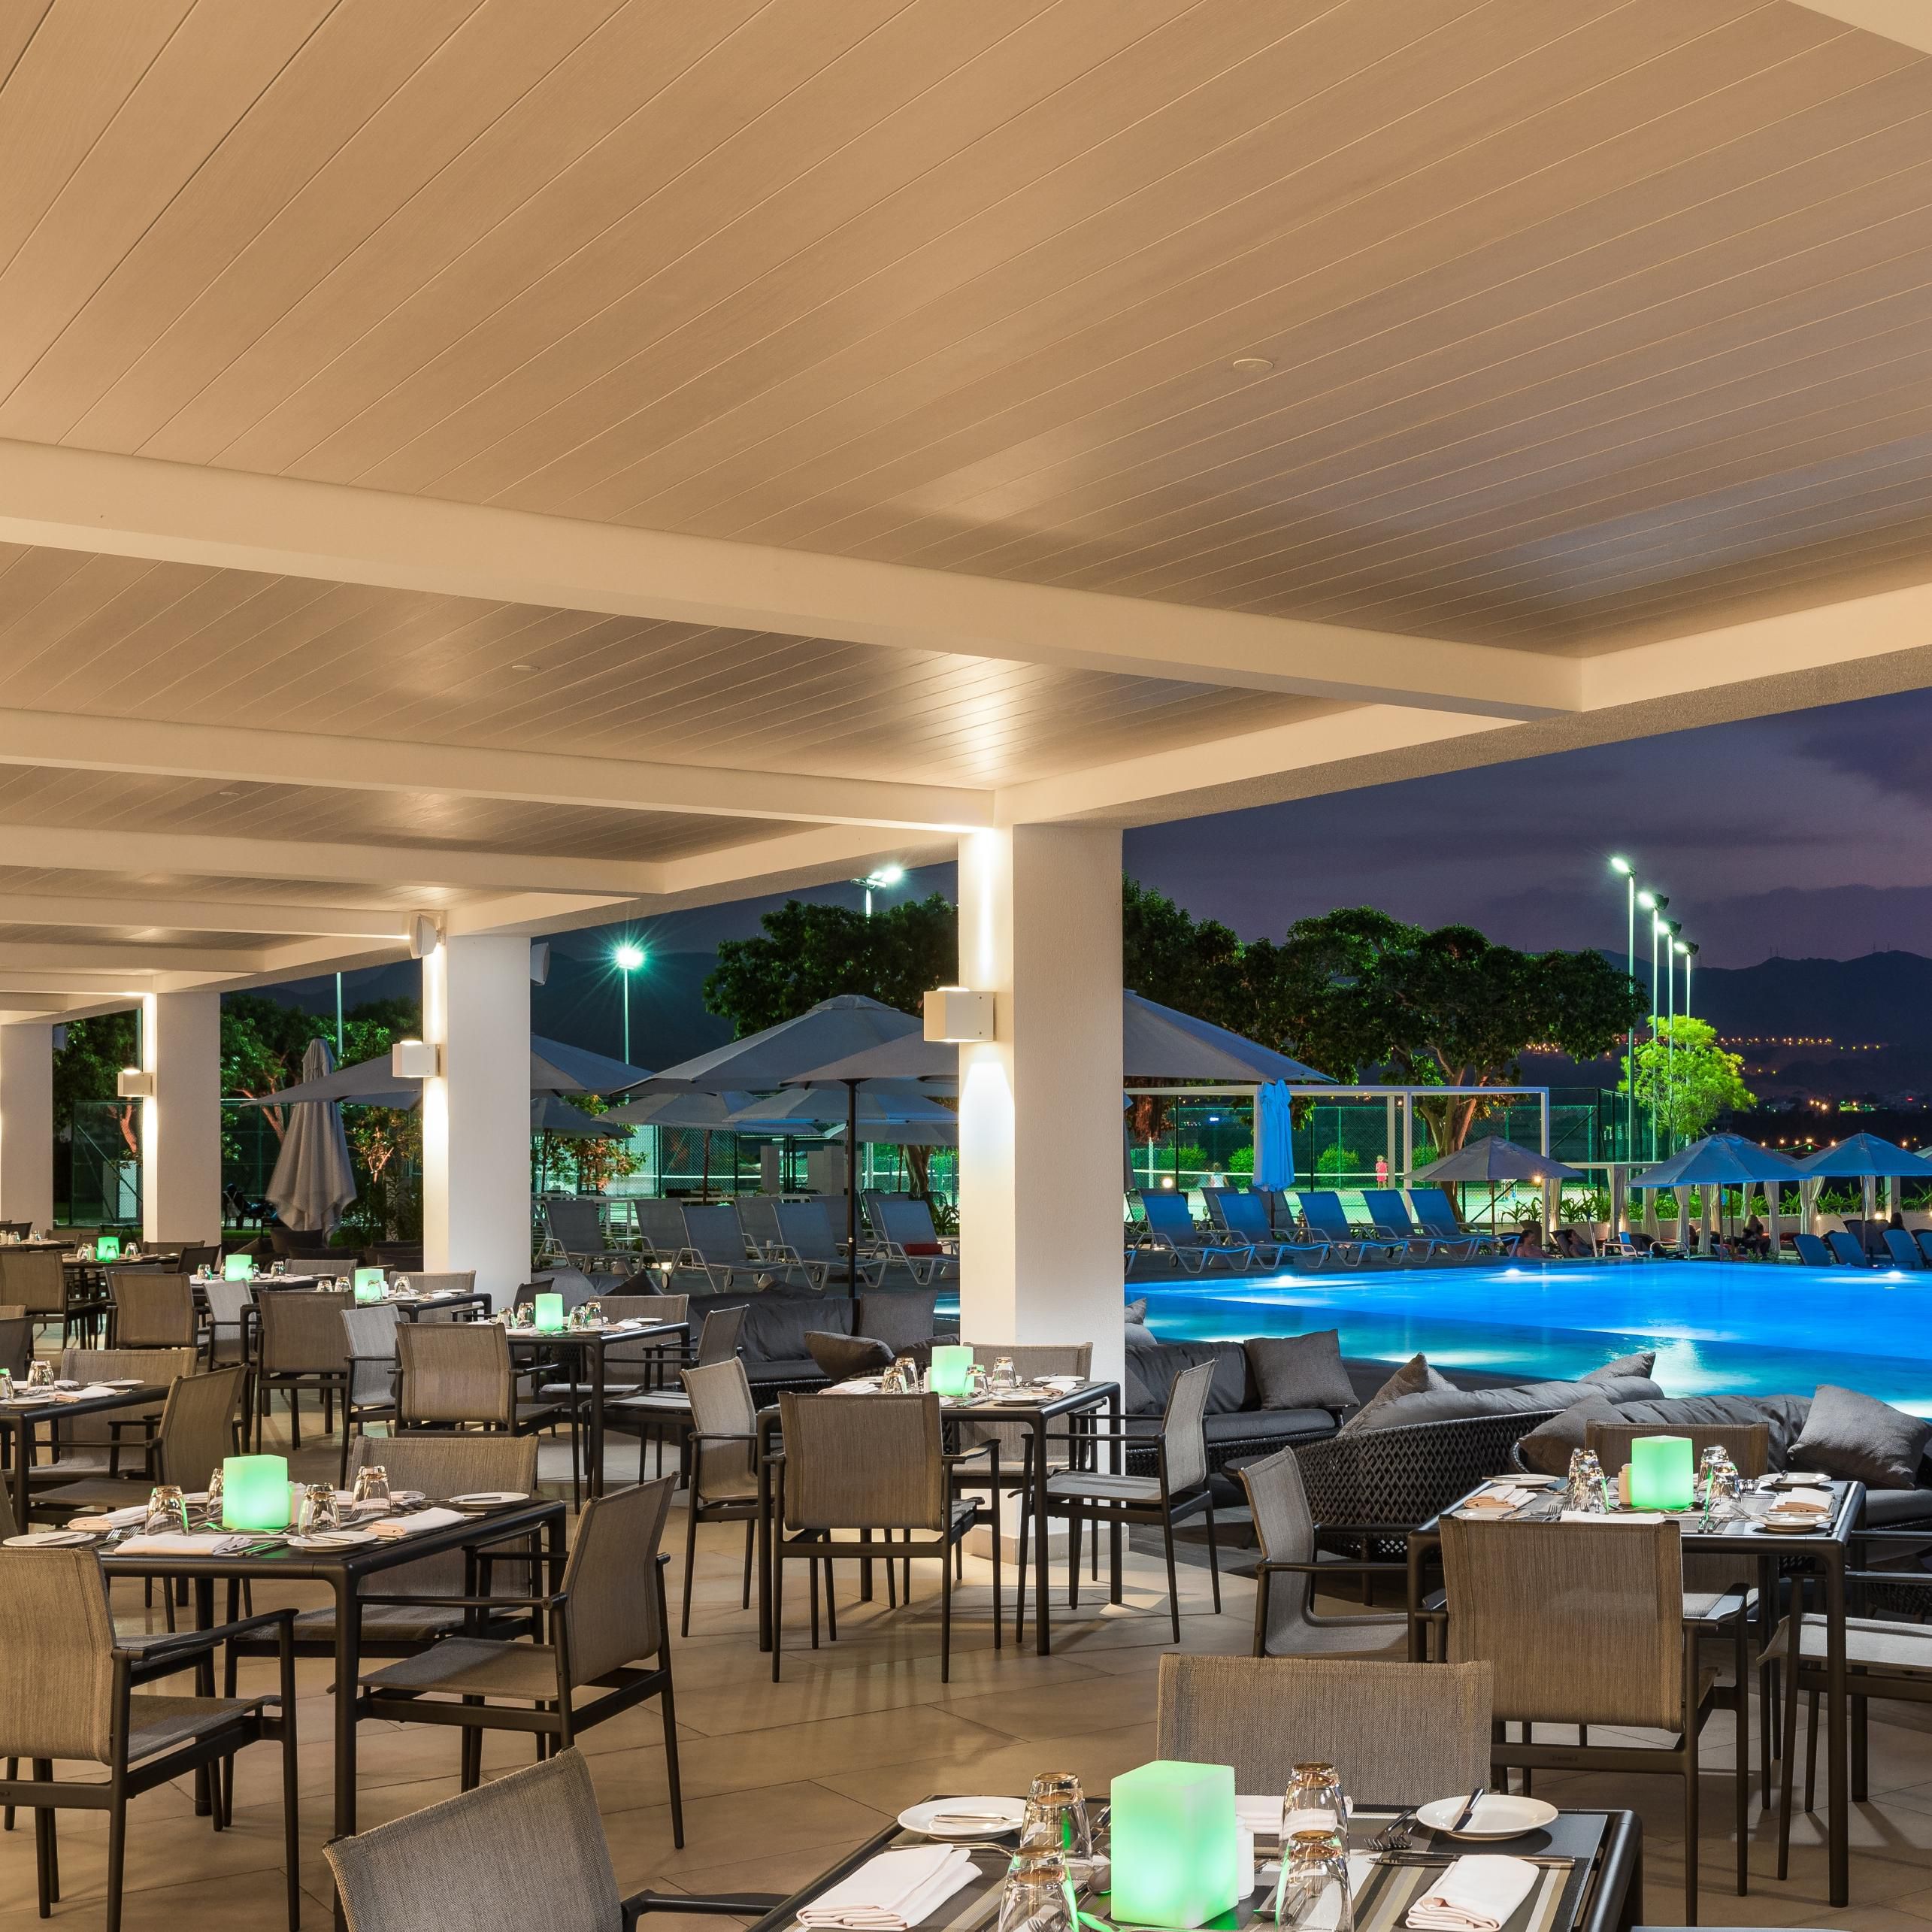 The Restaurant outdoor terrace by evening